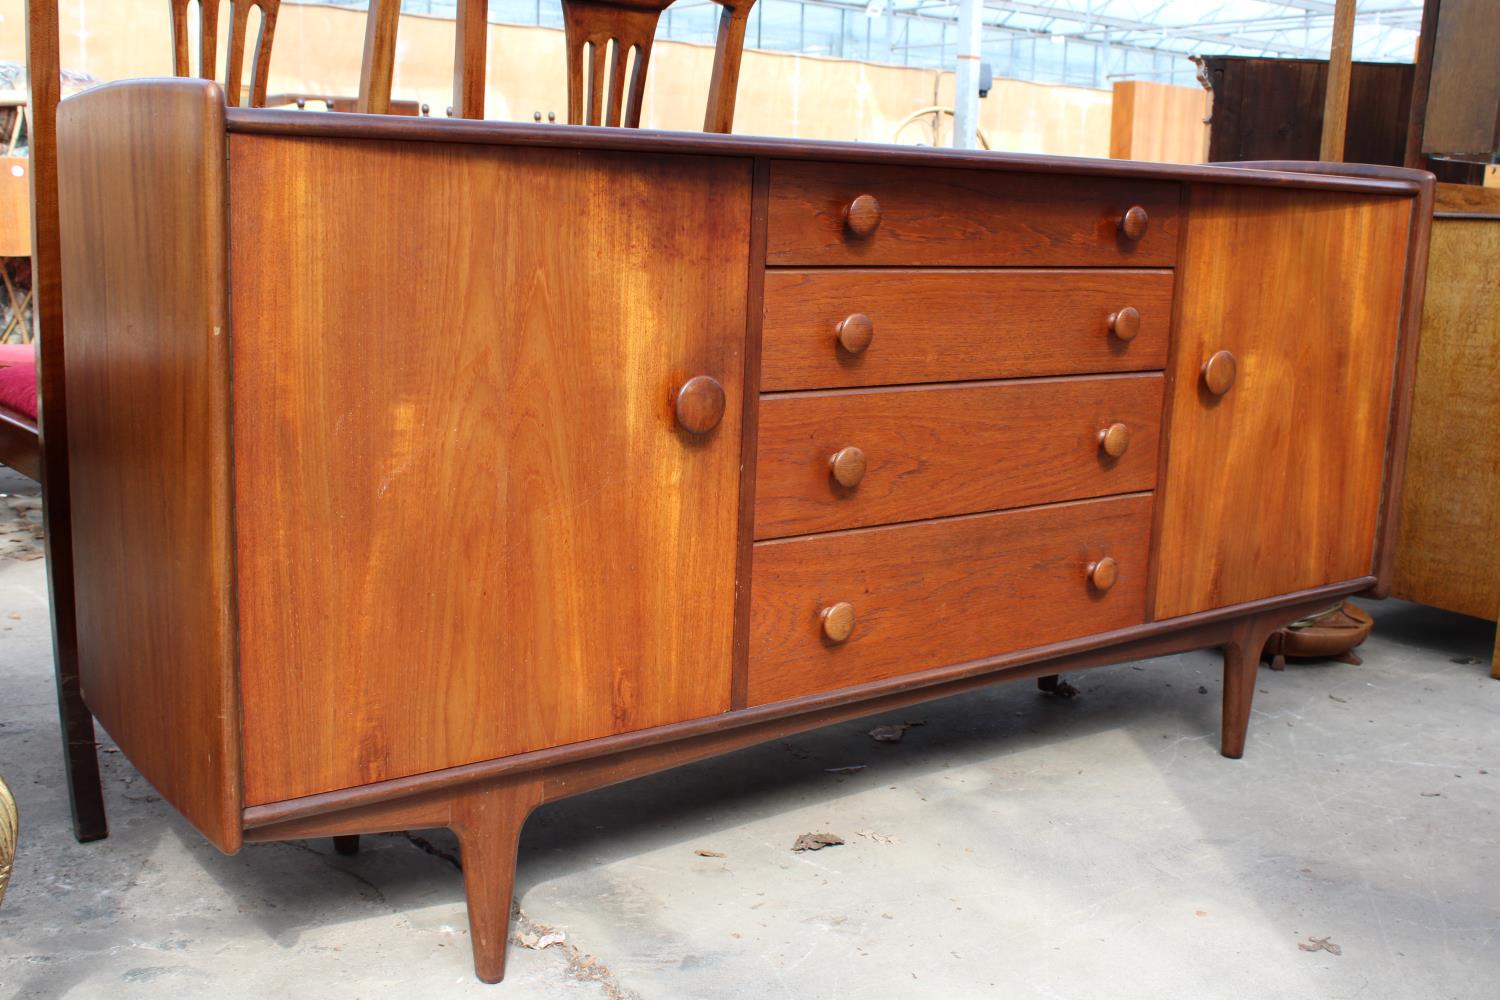 AN A YOUNGER LTD RETRO TEAK SIDEBOARD ENCLOSING TWO CUPBOARDS, FOUR DRAWERS, 66" WIDE - Image 2 of 7